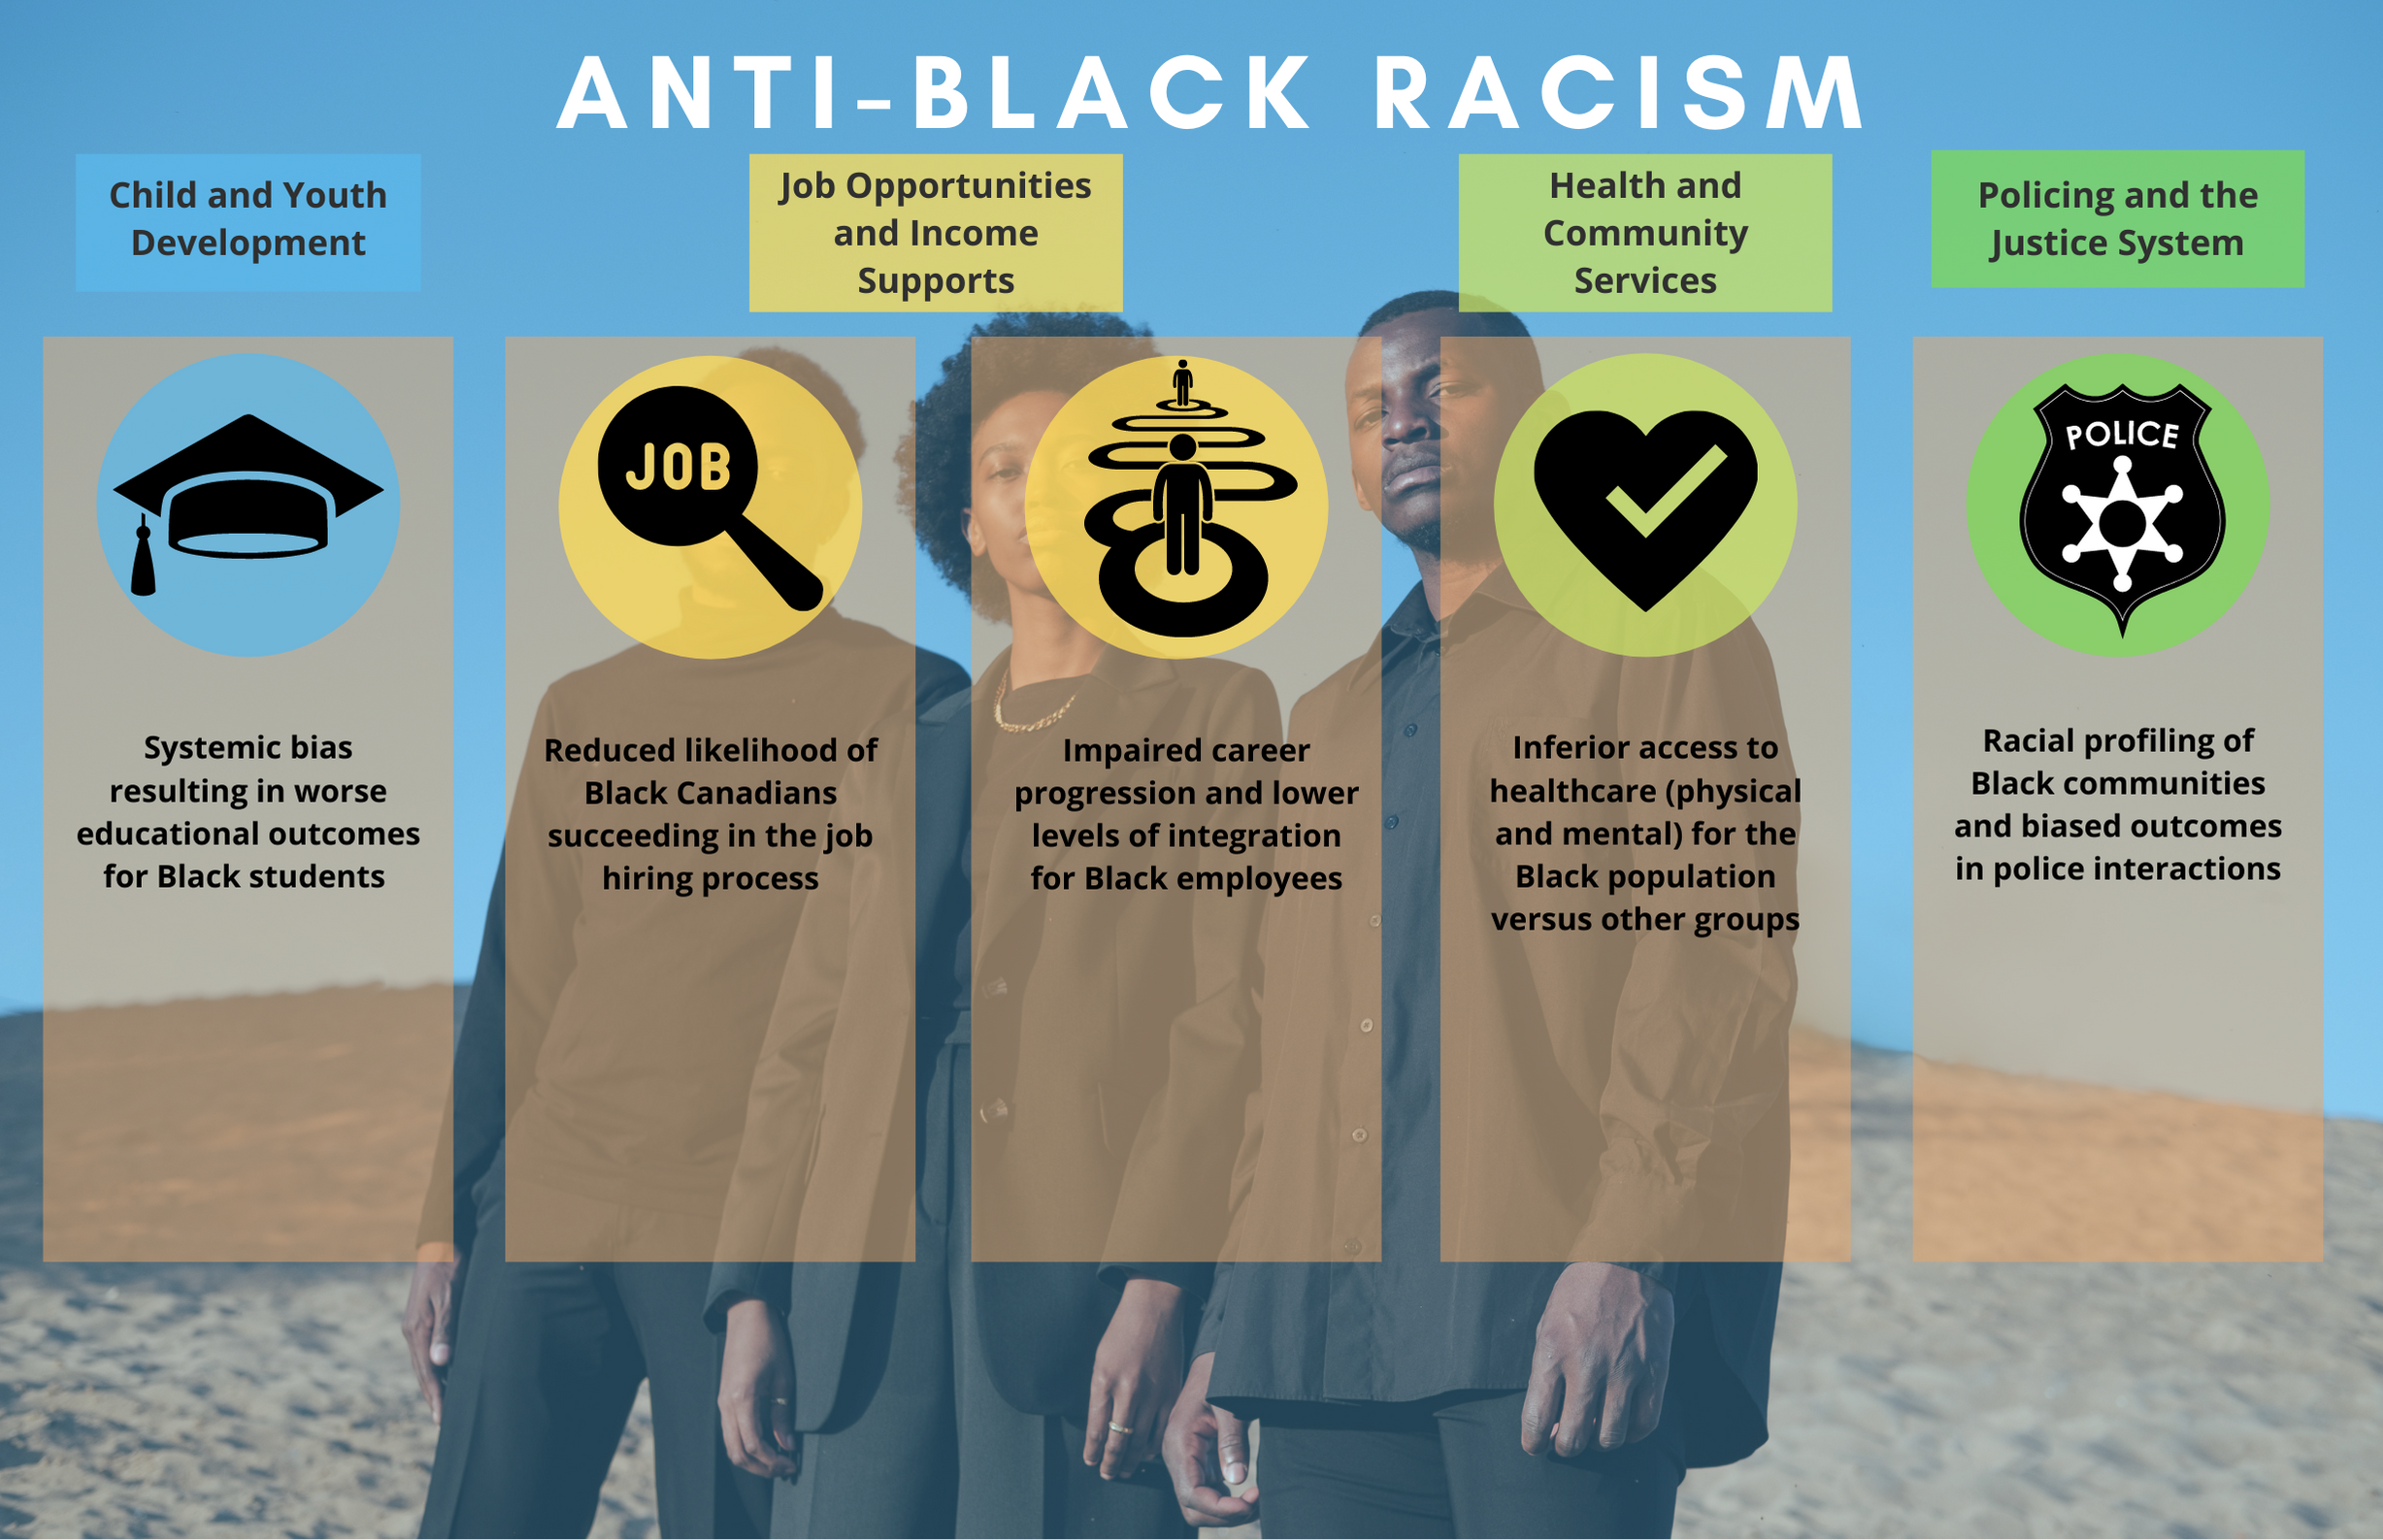 Title: Anti-Black Racism The following text is on an image of 3 people. Child and Youth Development: Systemic bias resulting in worse educational outcomes for Black students Job Opportunities and Income Supports: Reduced likelihood of Black Canadians succeeding in the job hiring process Impaired career progression and lower levels of integration for Black employees Health and Community Services: Inferior access to healthcare (physical and mental) for the Black population versus other groups Policing and the Justice System: Racial profiling of Black communities and biased outcomes in police interactions